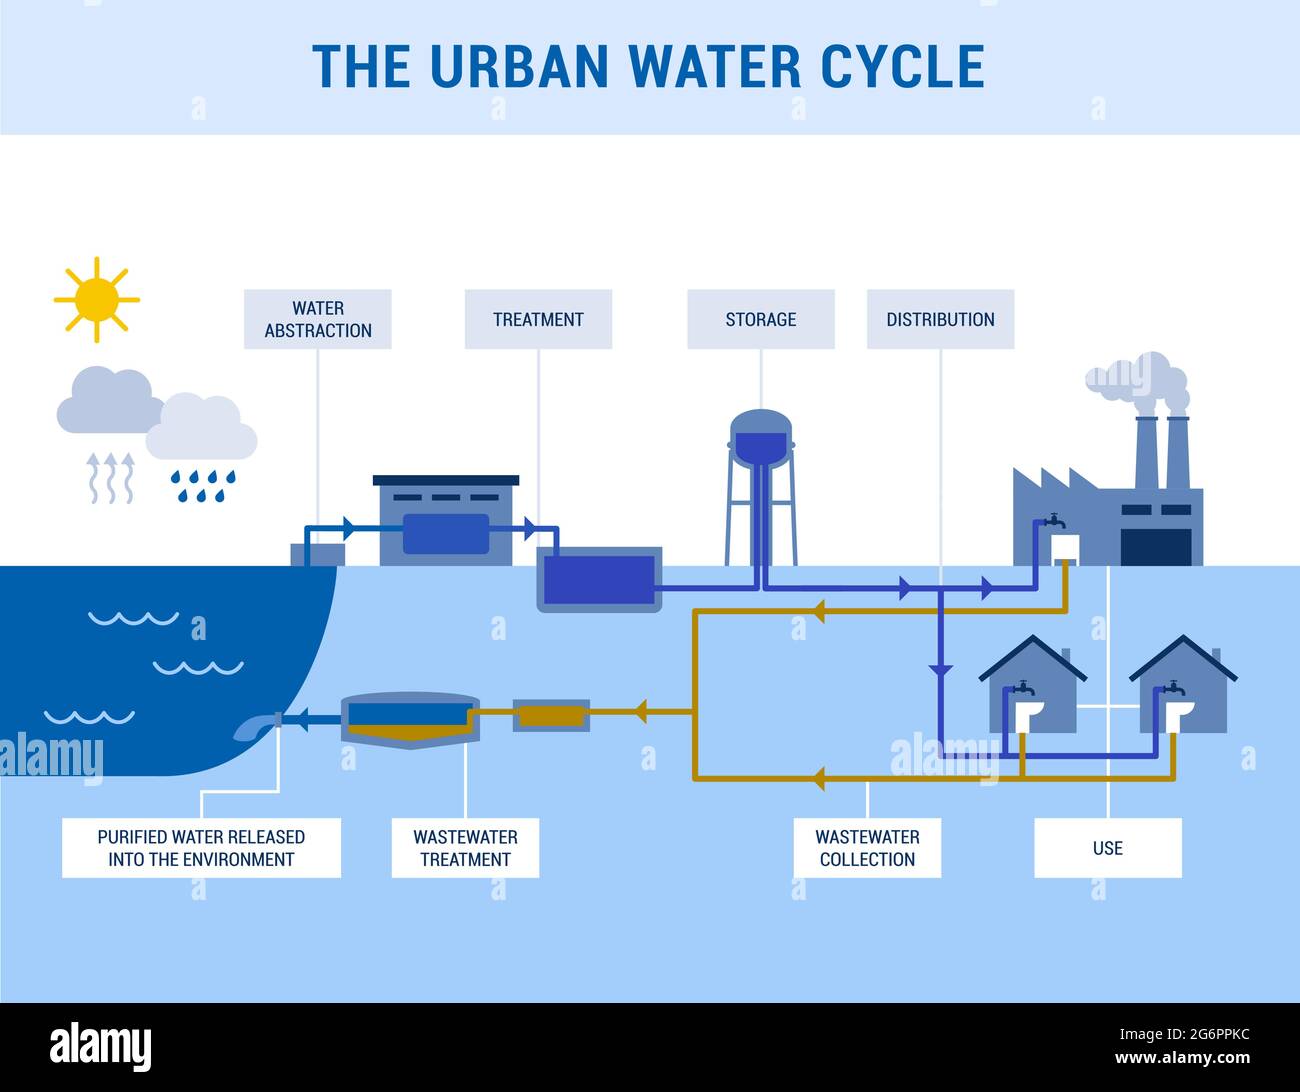 The urban water cycle: water abstraction, treatment, distribution and wastewater management infographic Stock Vector